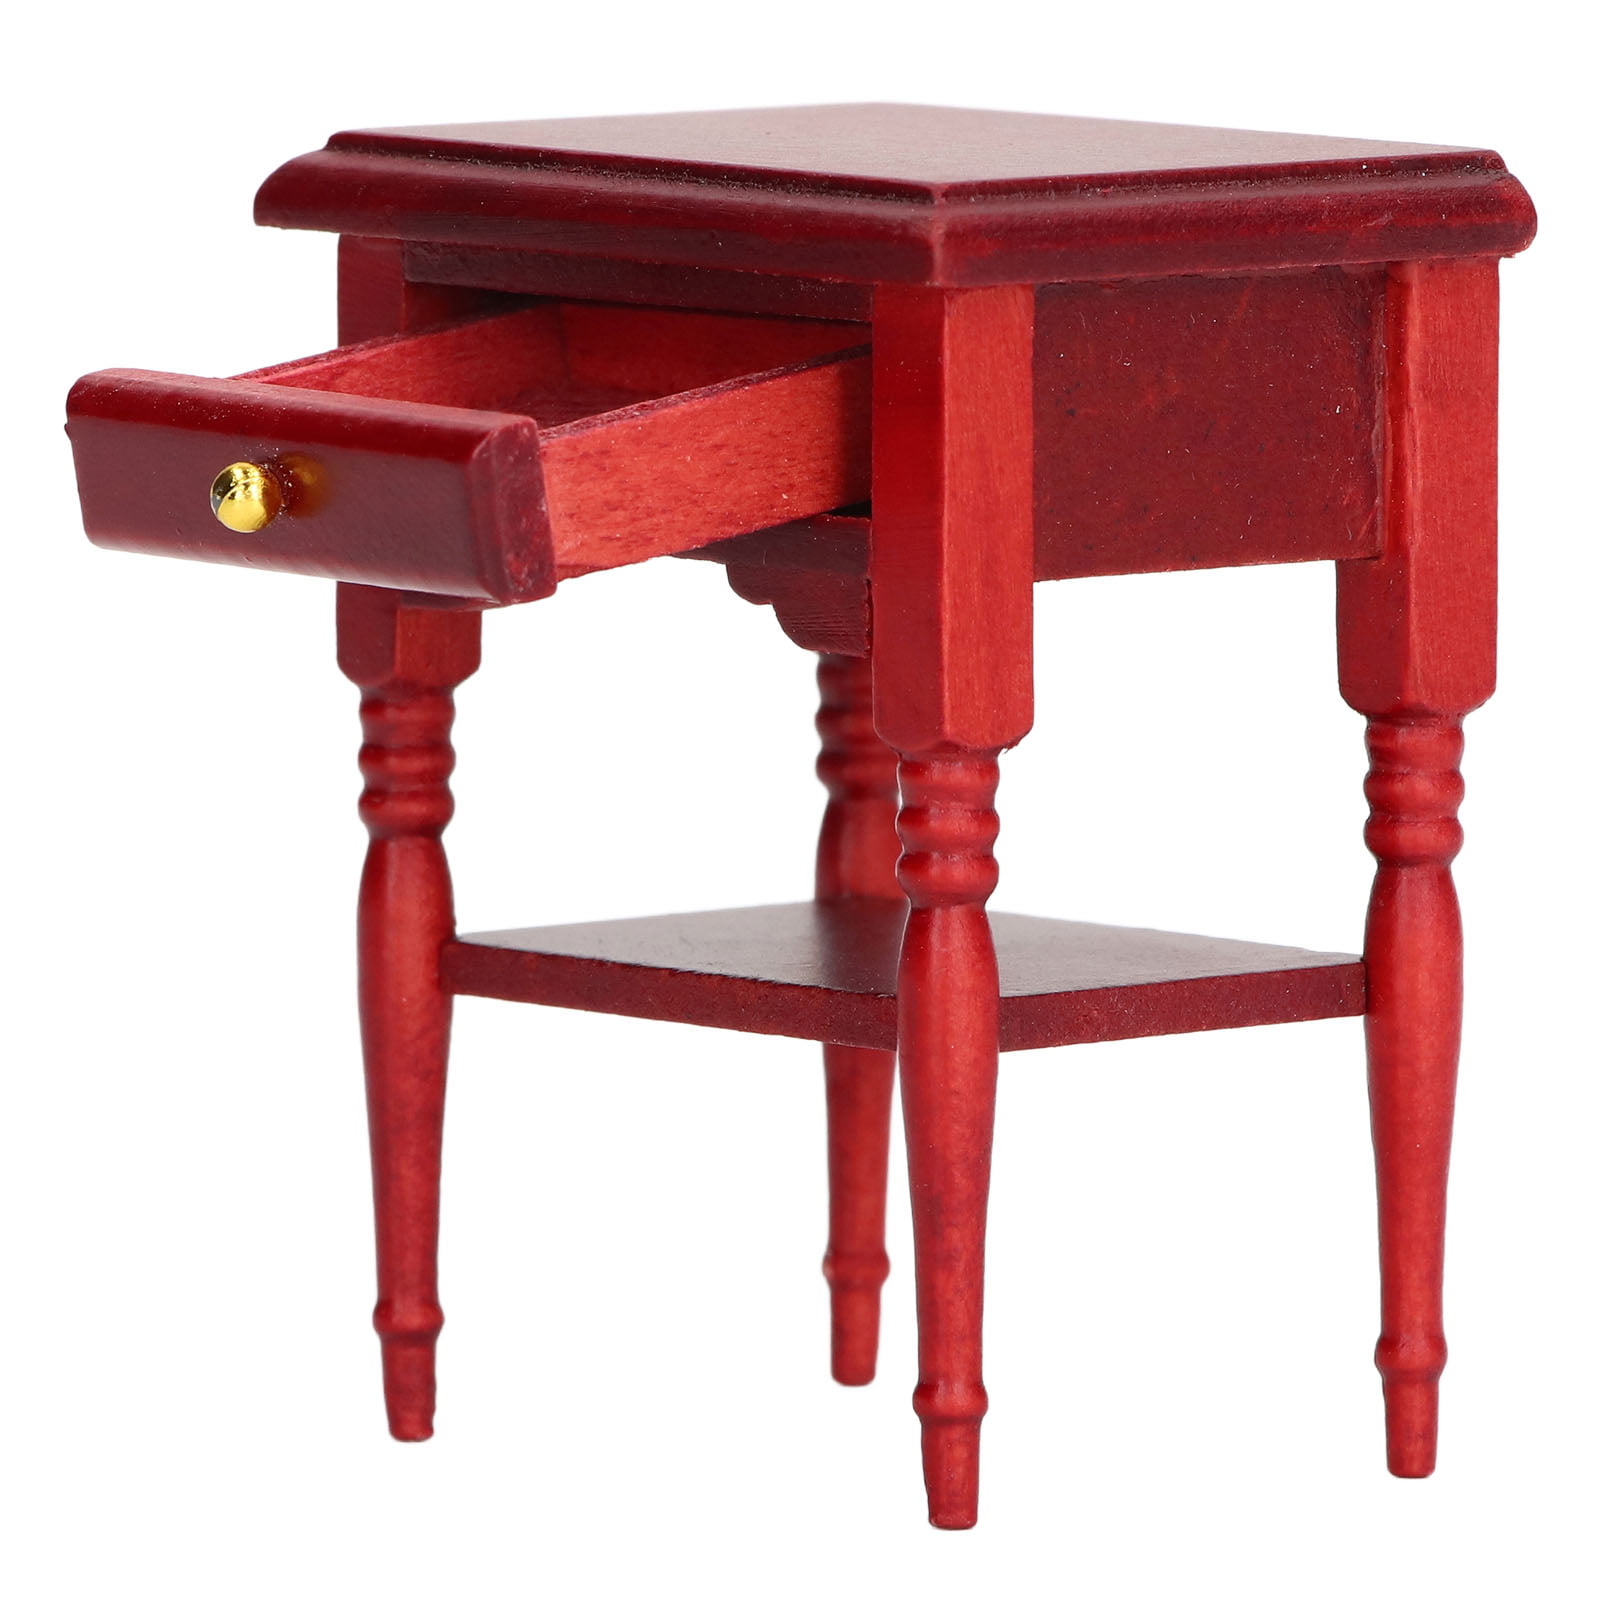 For Table Furniture 1:12 Miniature Bedside Nightstand Toy Doll House Bedroom 